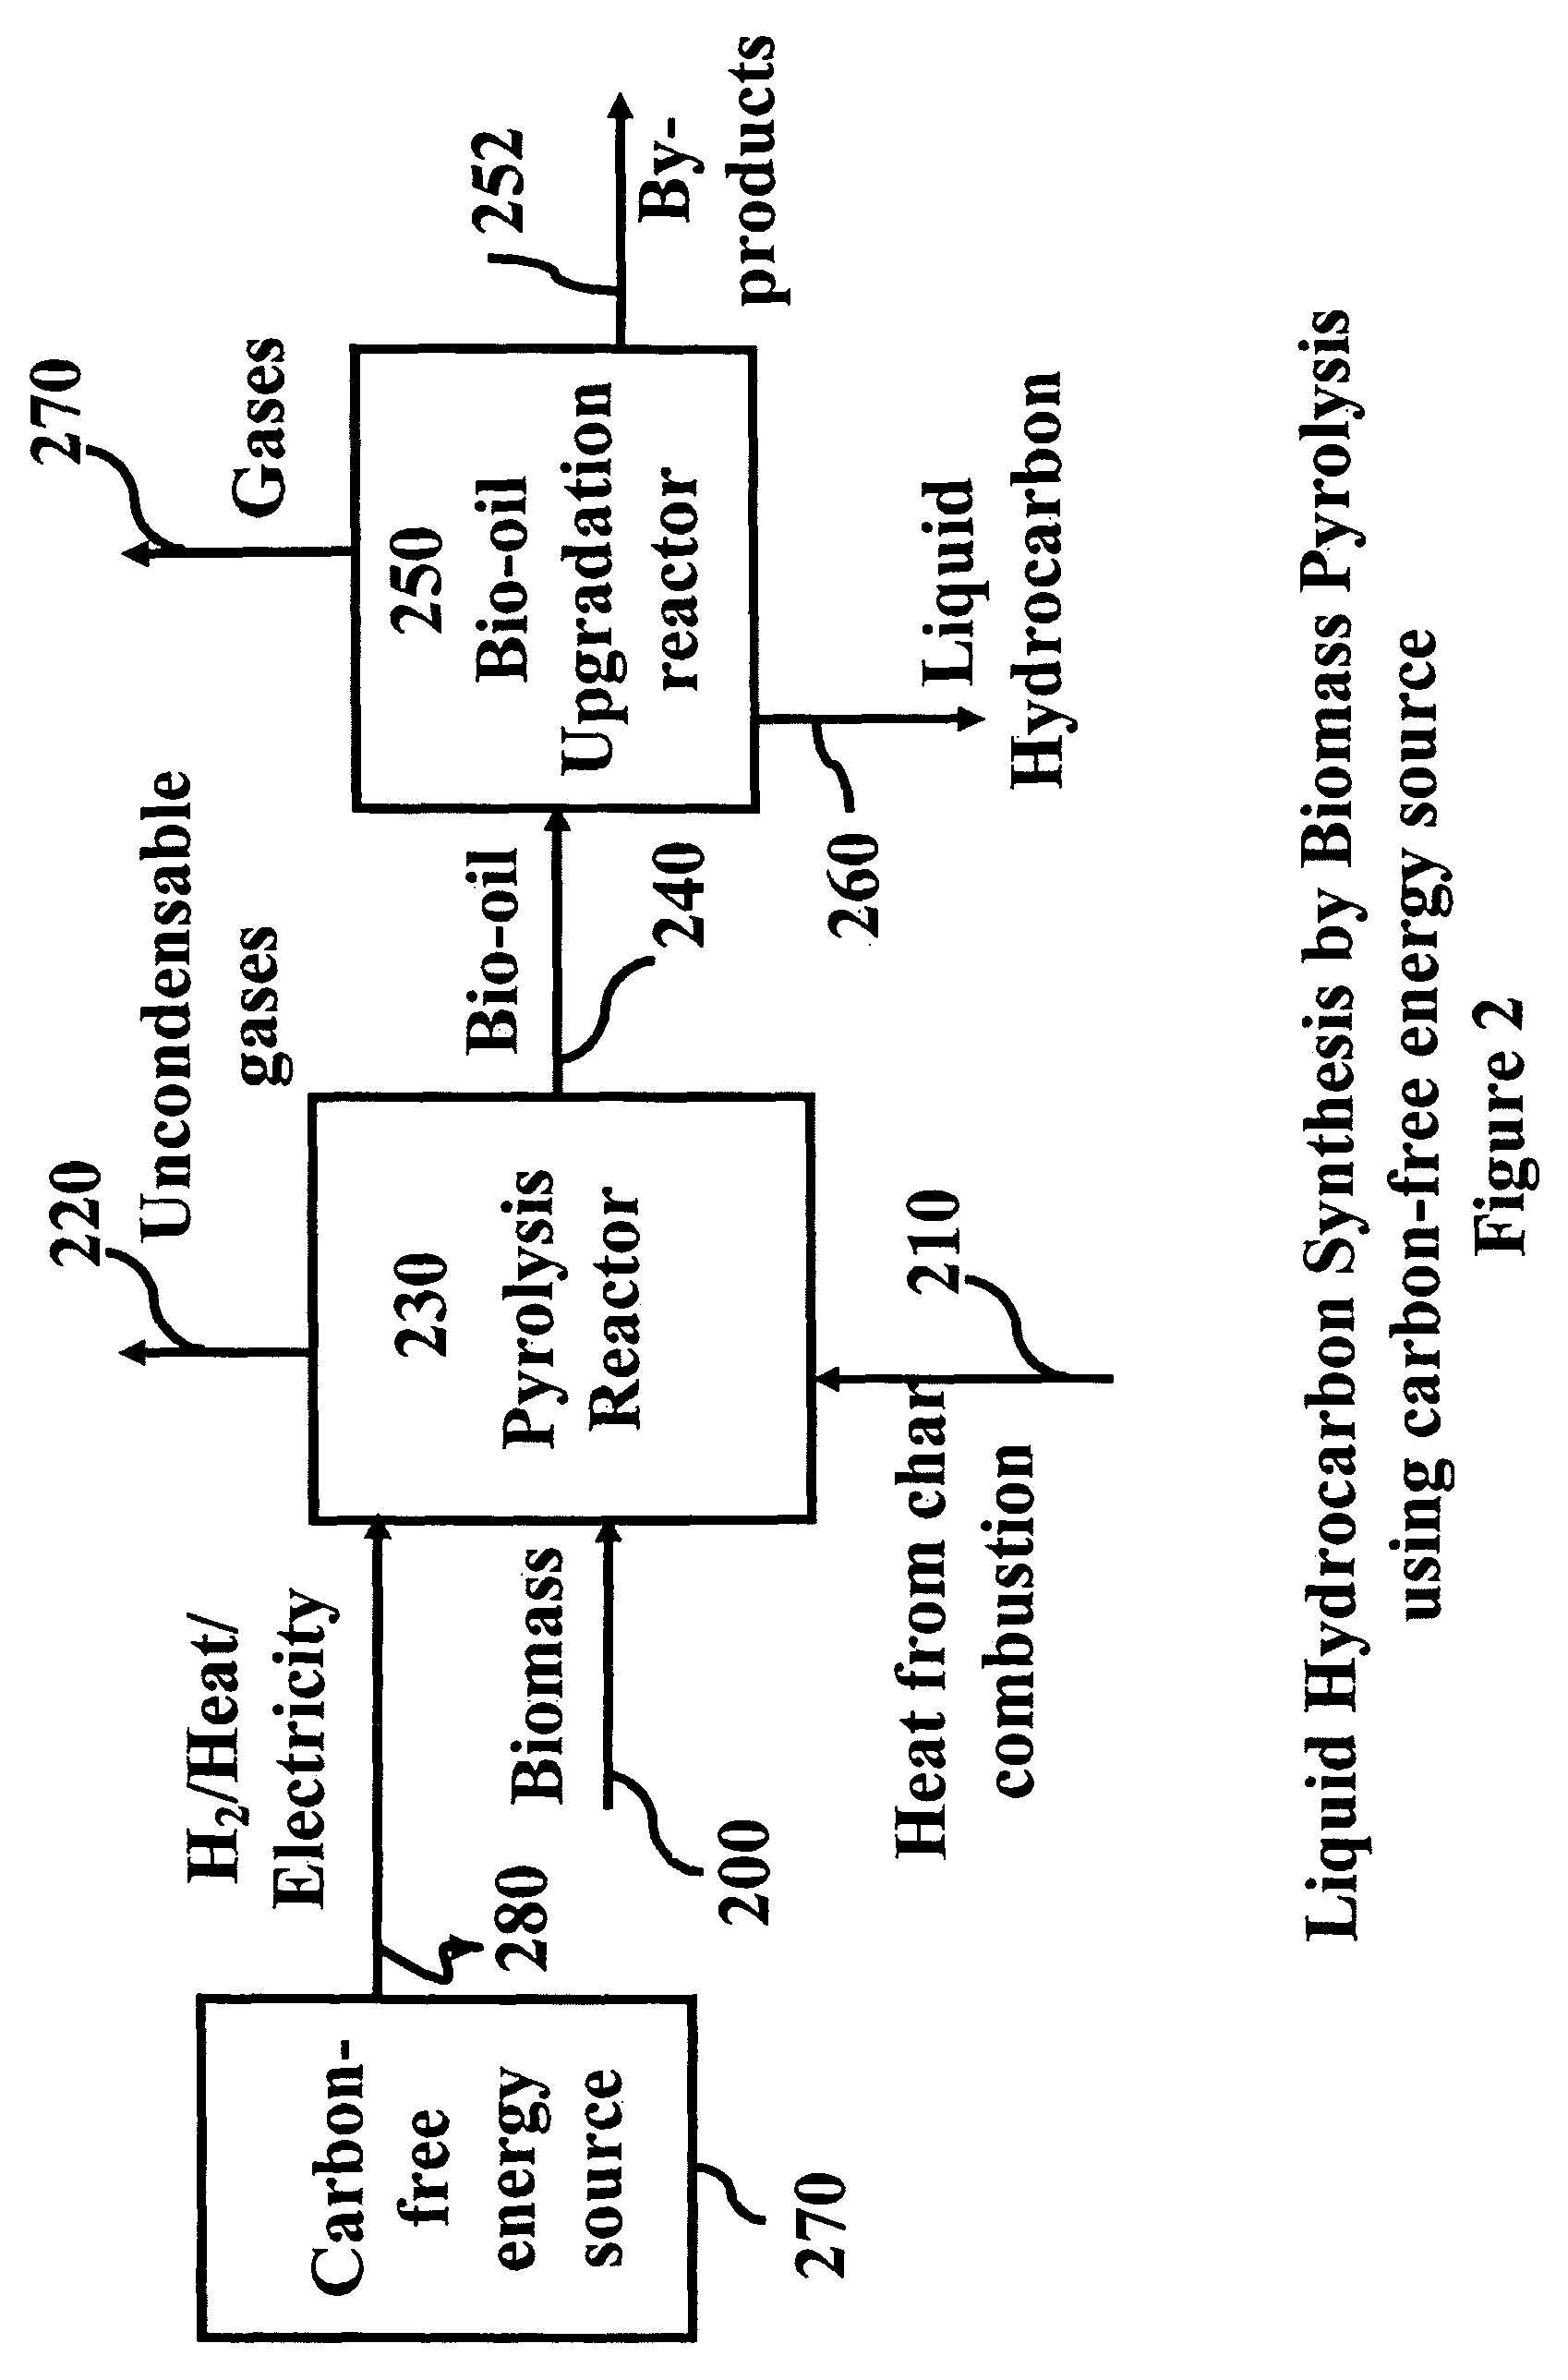 Process for producing liquid hydrocarbon by pyrolysis of biomass in presence of hydrogen from a carbon-free energy source